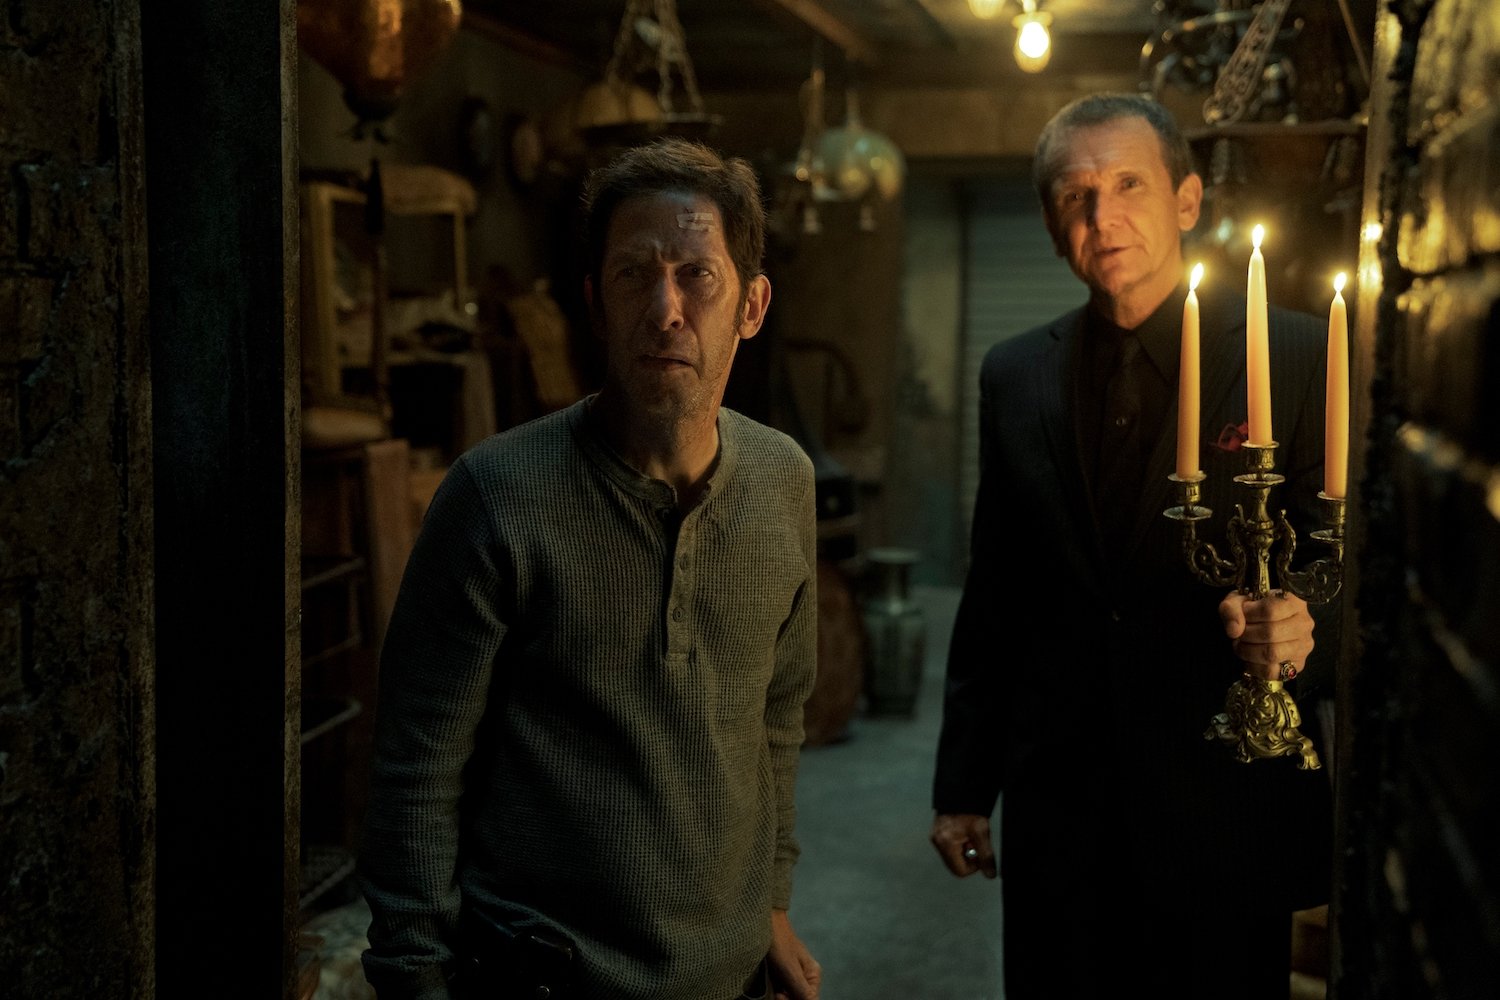 'Cabinet of Curiosities' episode 'Lot 36' stars Tim Blake Nelson and Sebastian Roche, seen here peering into a secret room in a production still.